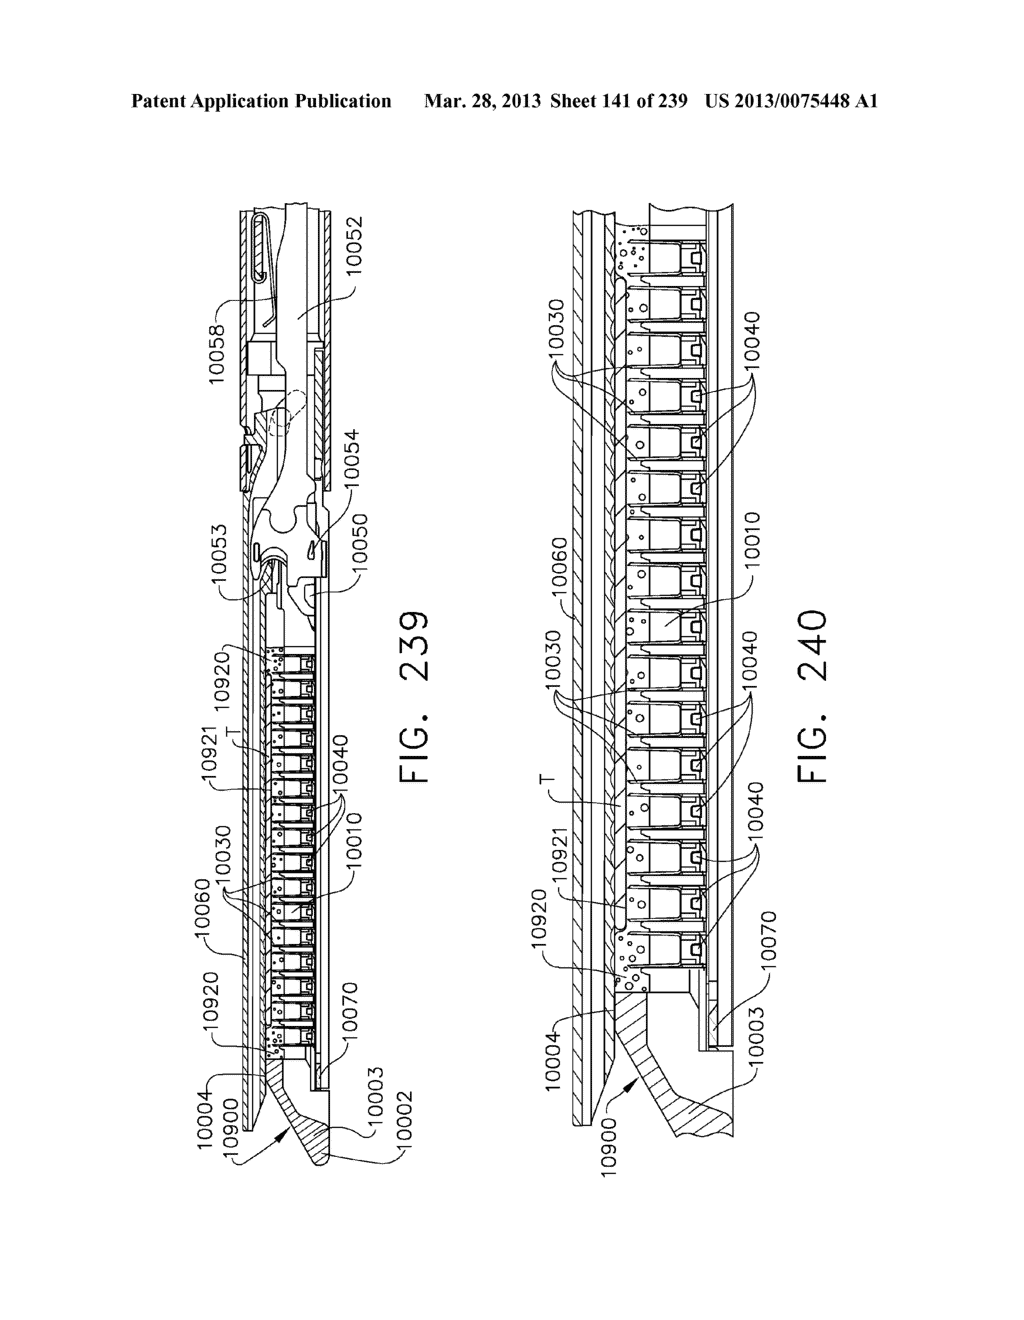 STAPLE CARTRIDGE INCLUDING COLLAPSIBLE DECK ARRANGEMENT - diagram, schematic, and image 142